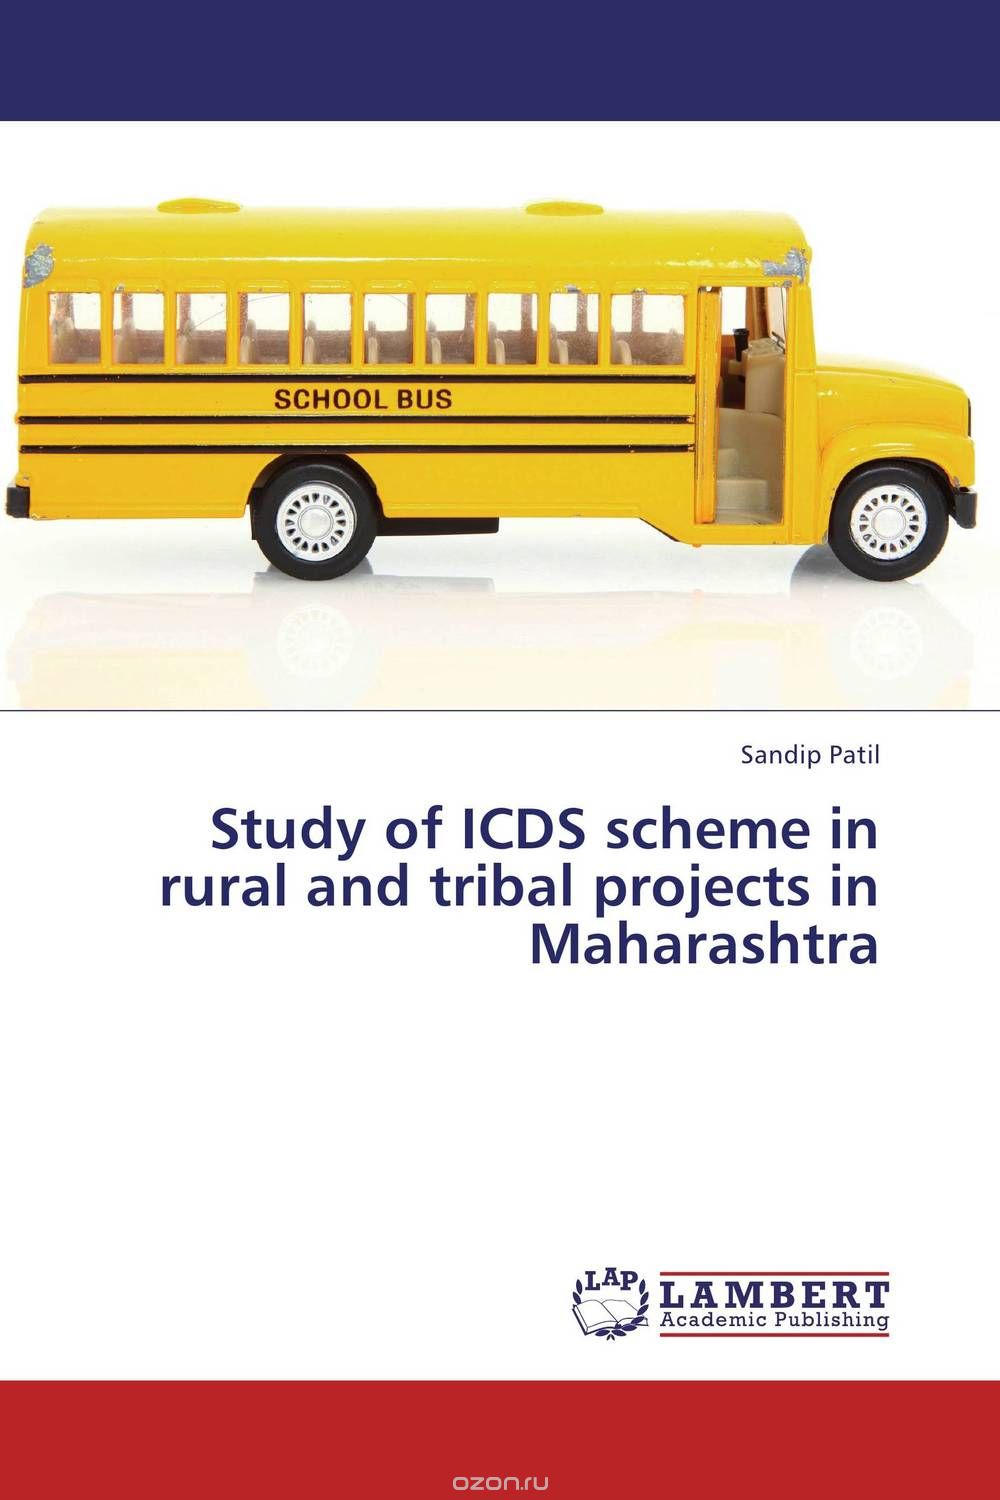 Study of ICDS scheme in rural and tribal projects in Maharashtra